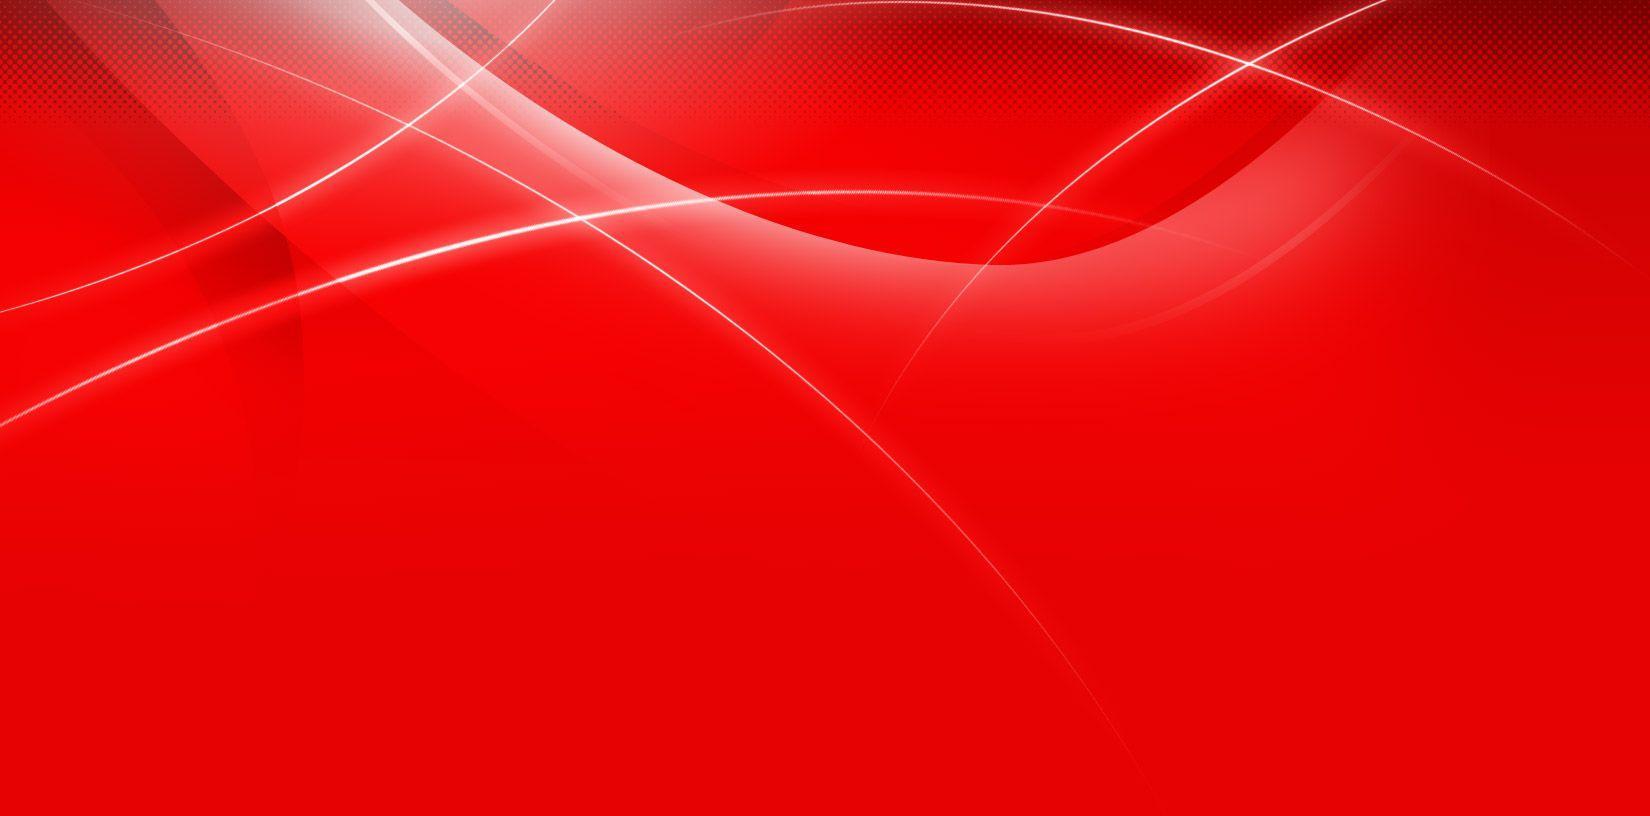 red background 03. Work at home